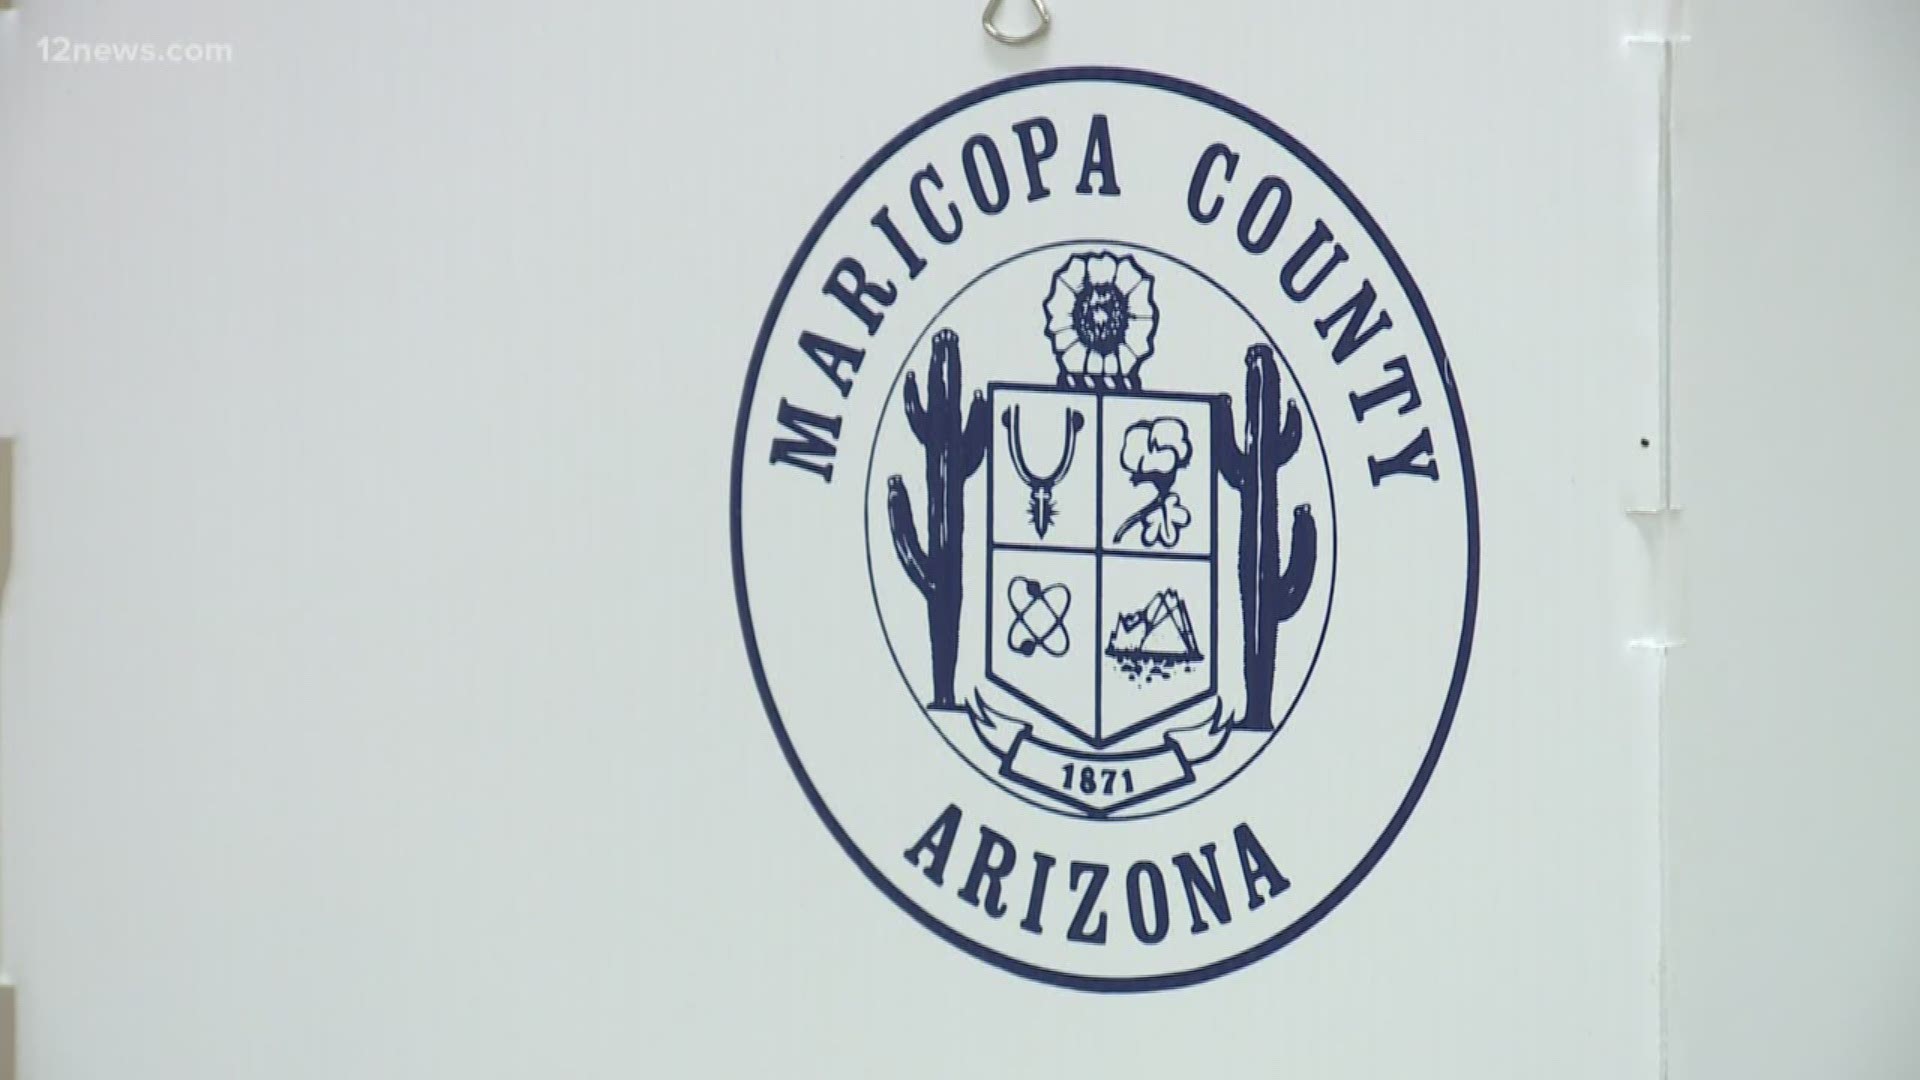 Ahead of the 2020 election Maricopa County has set up a new website, ballots and voting machines to make sure voting goes as smooth as possible.